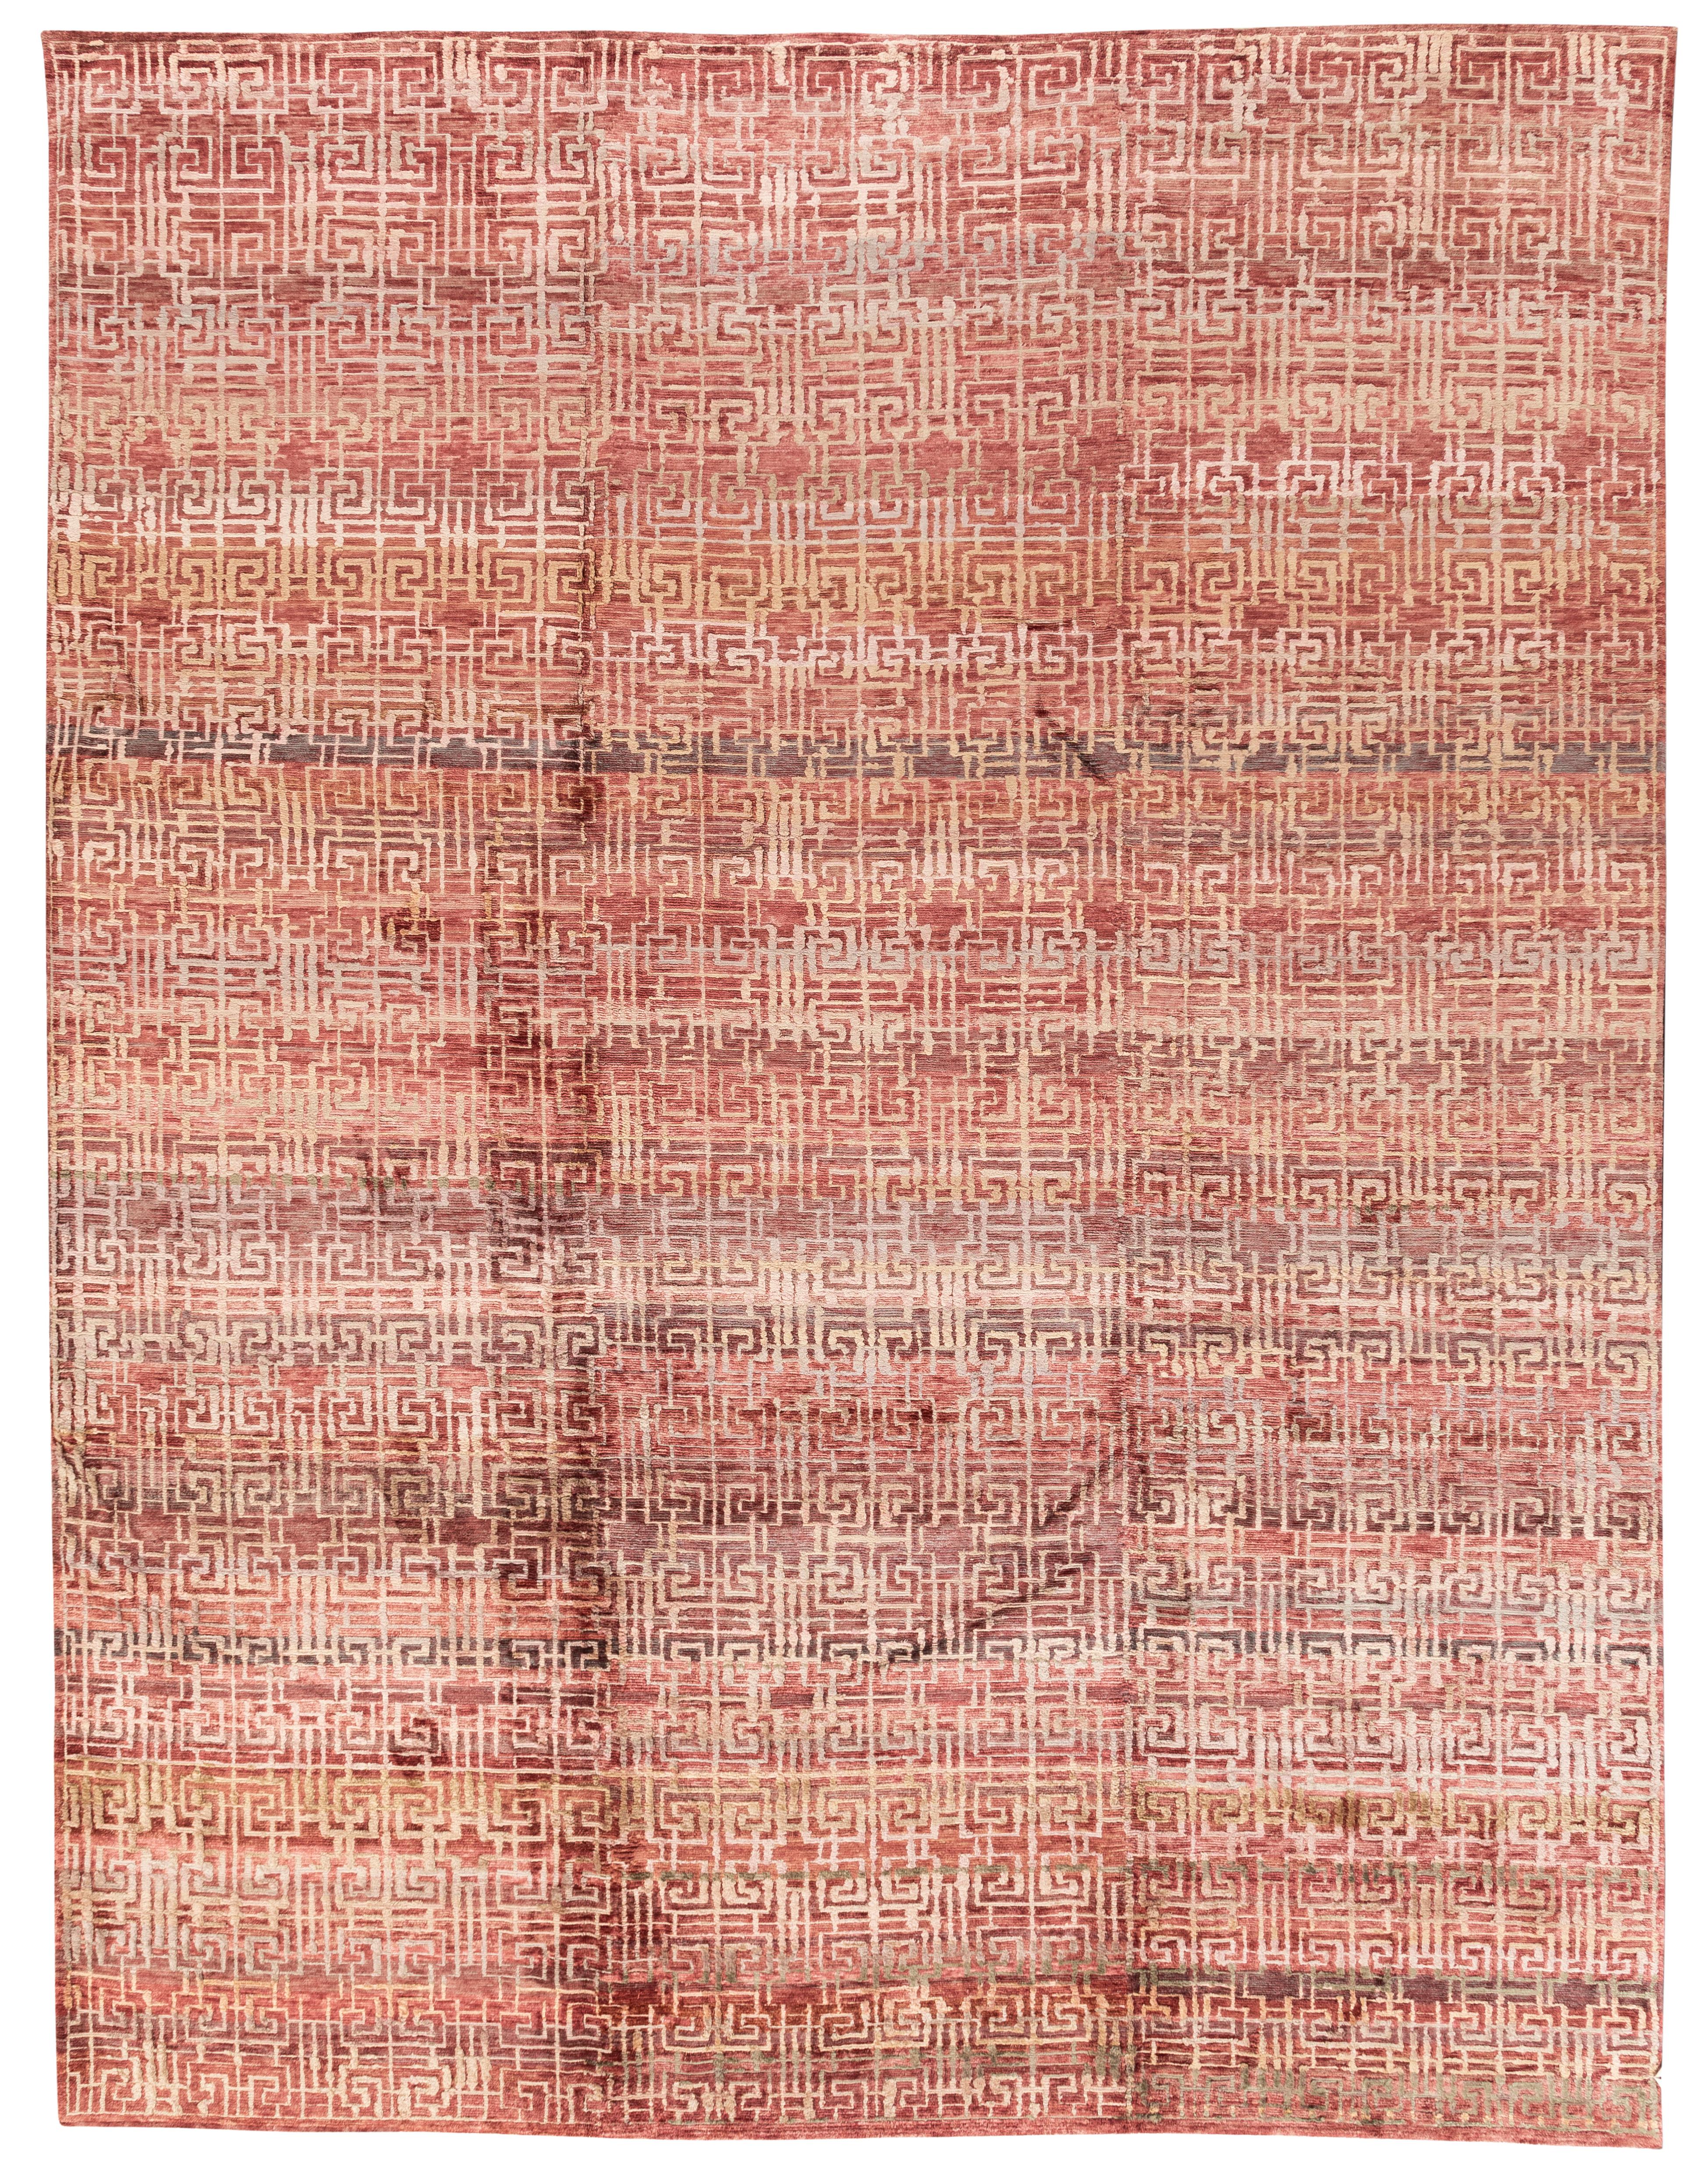 
With a smart modification of our ancient Tibetan carpet hand woven process, the Rebel Silk technique gives each carpet a unique and sacred geometry, one that is augmented by delicious hues of delicately hand dyed silk. Geo Rose is a Rebel Silk